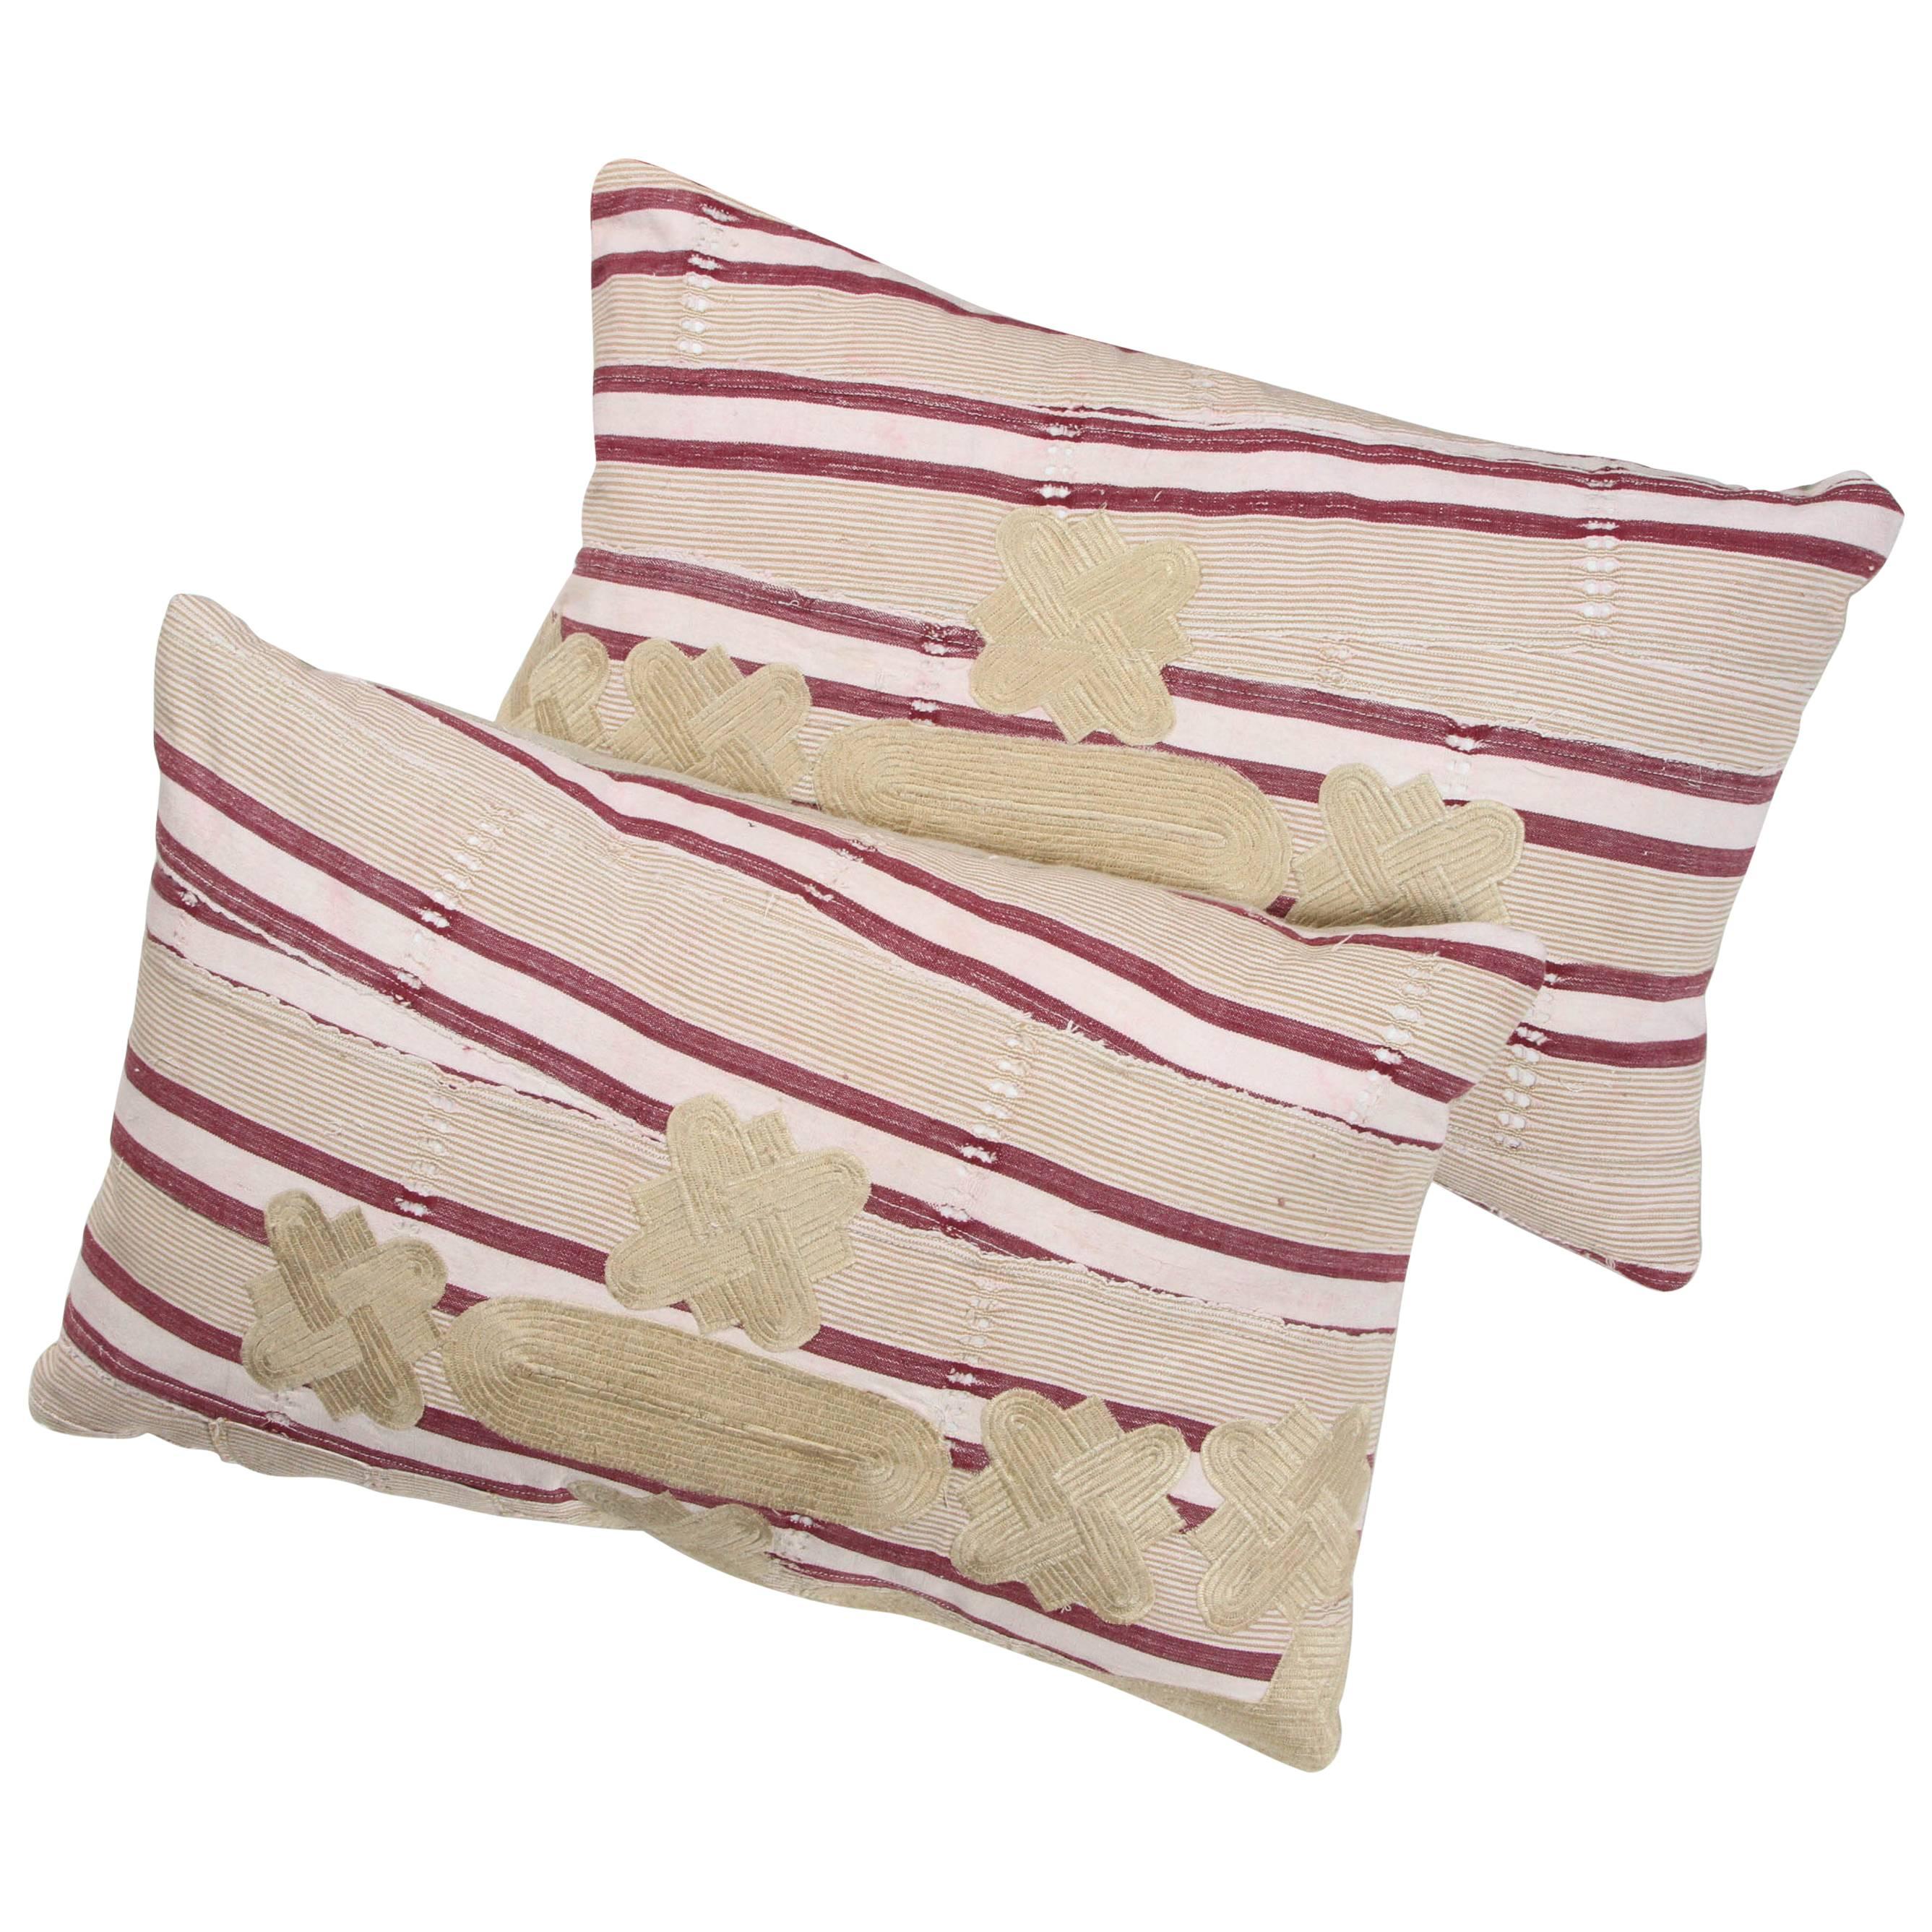 Embroidered Ashante African Textile Pillows. 15 x 25  For Sale